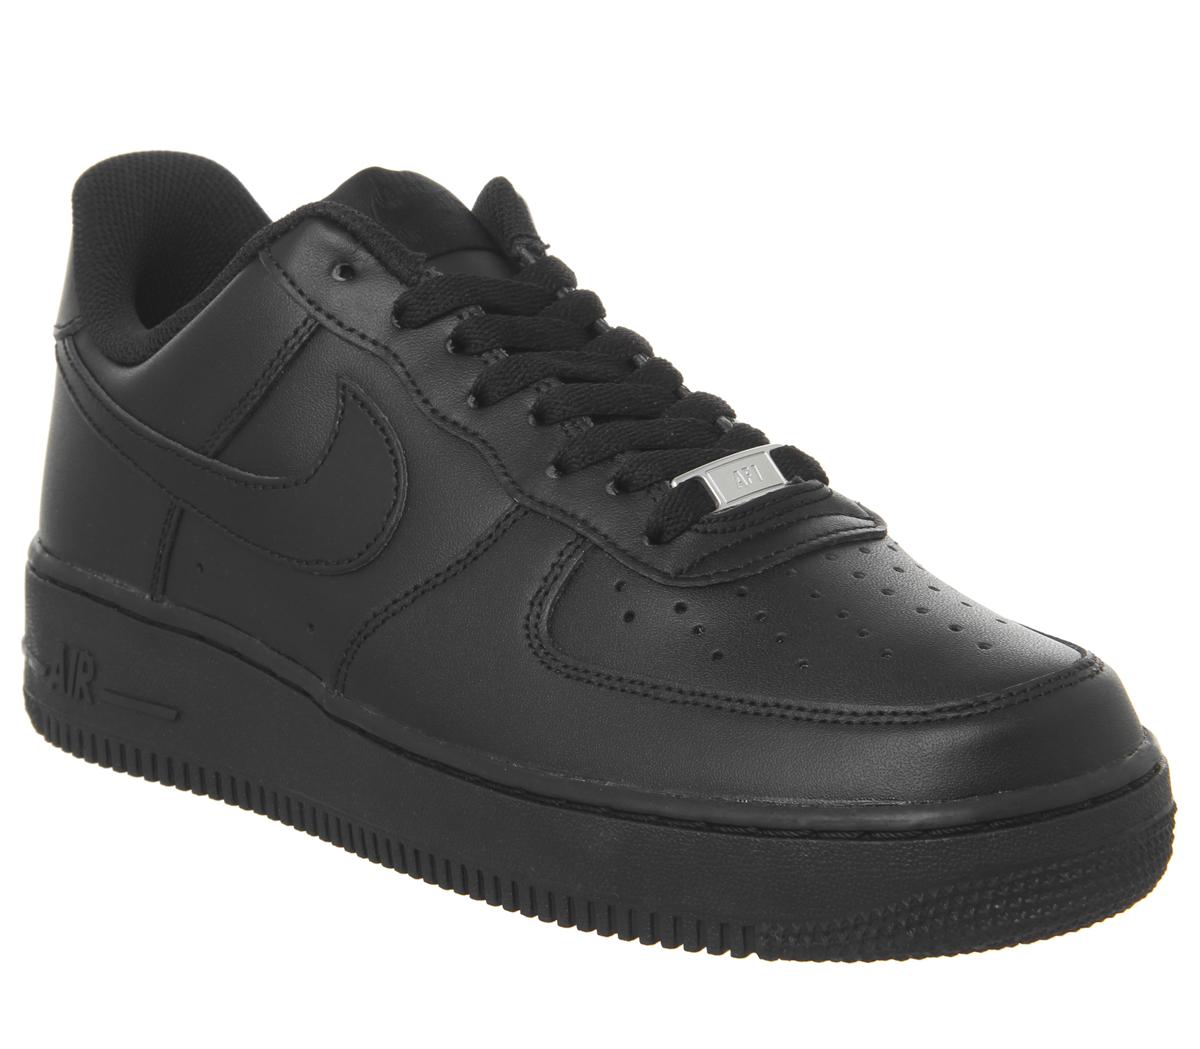 Nike Air Force 1 (m) Black - His trainers